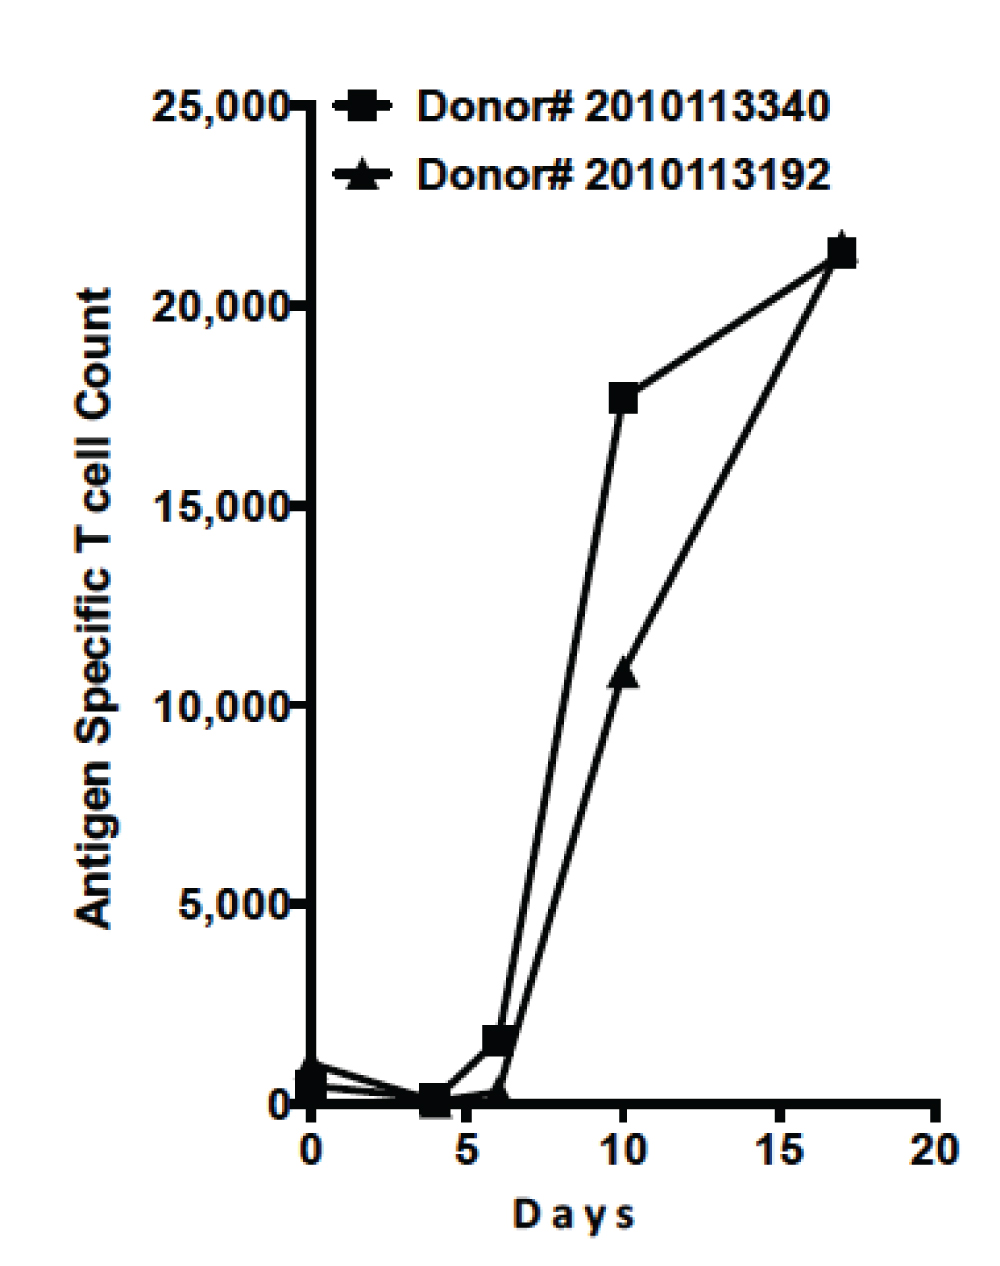 [MISSING IMAGE: t1702624_line-donor.jpg]